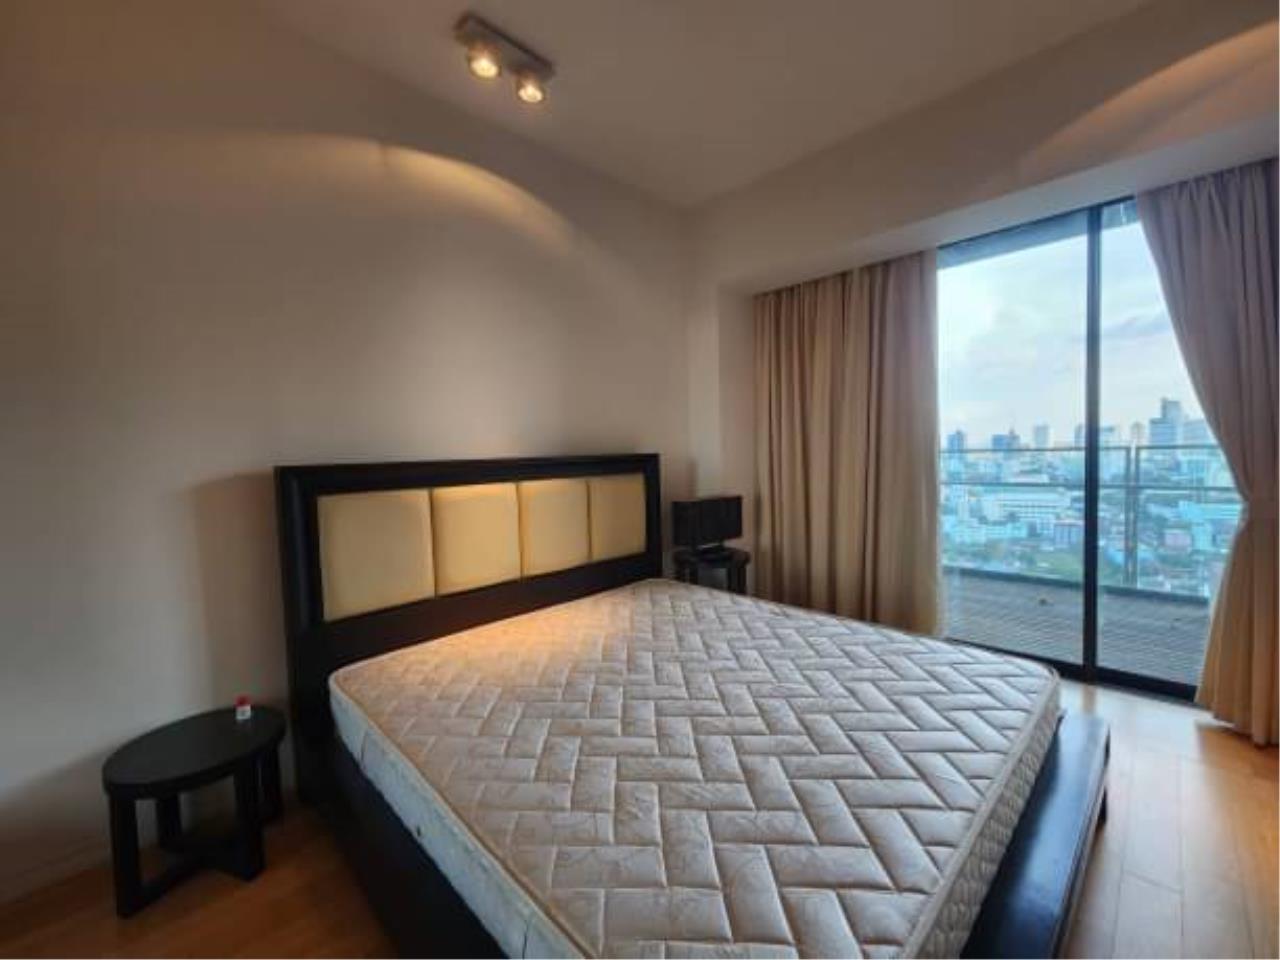 2 Bedrooms, 2 Bathrooms Size 93.22sqm. The MET Sathorn For Rent 65,000 THB & For Sale 17.1MTHB